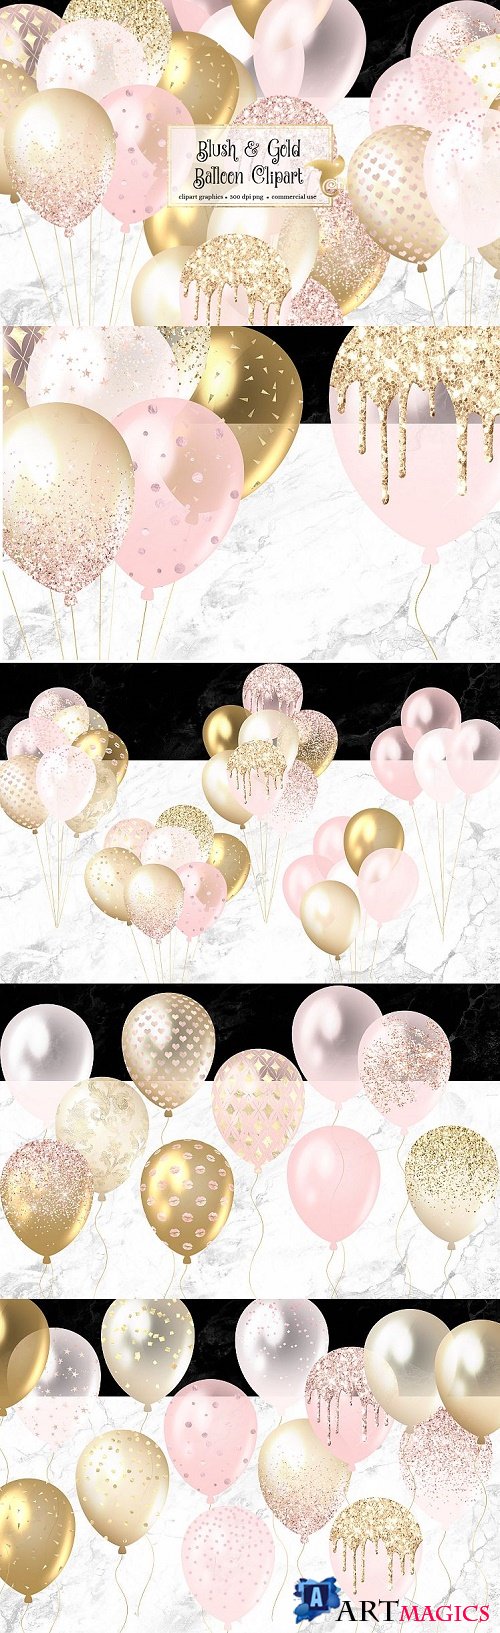 Blush Pink and Gold Balloons Clipart - 463500